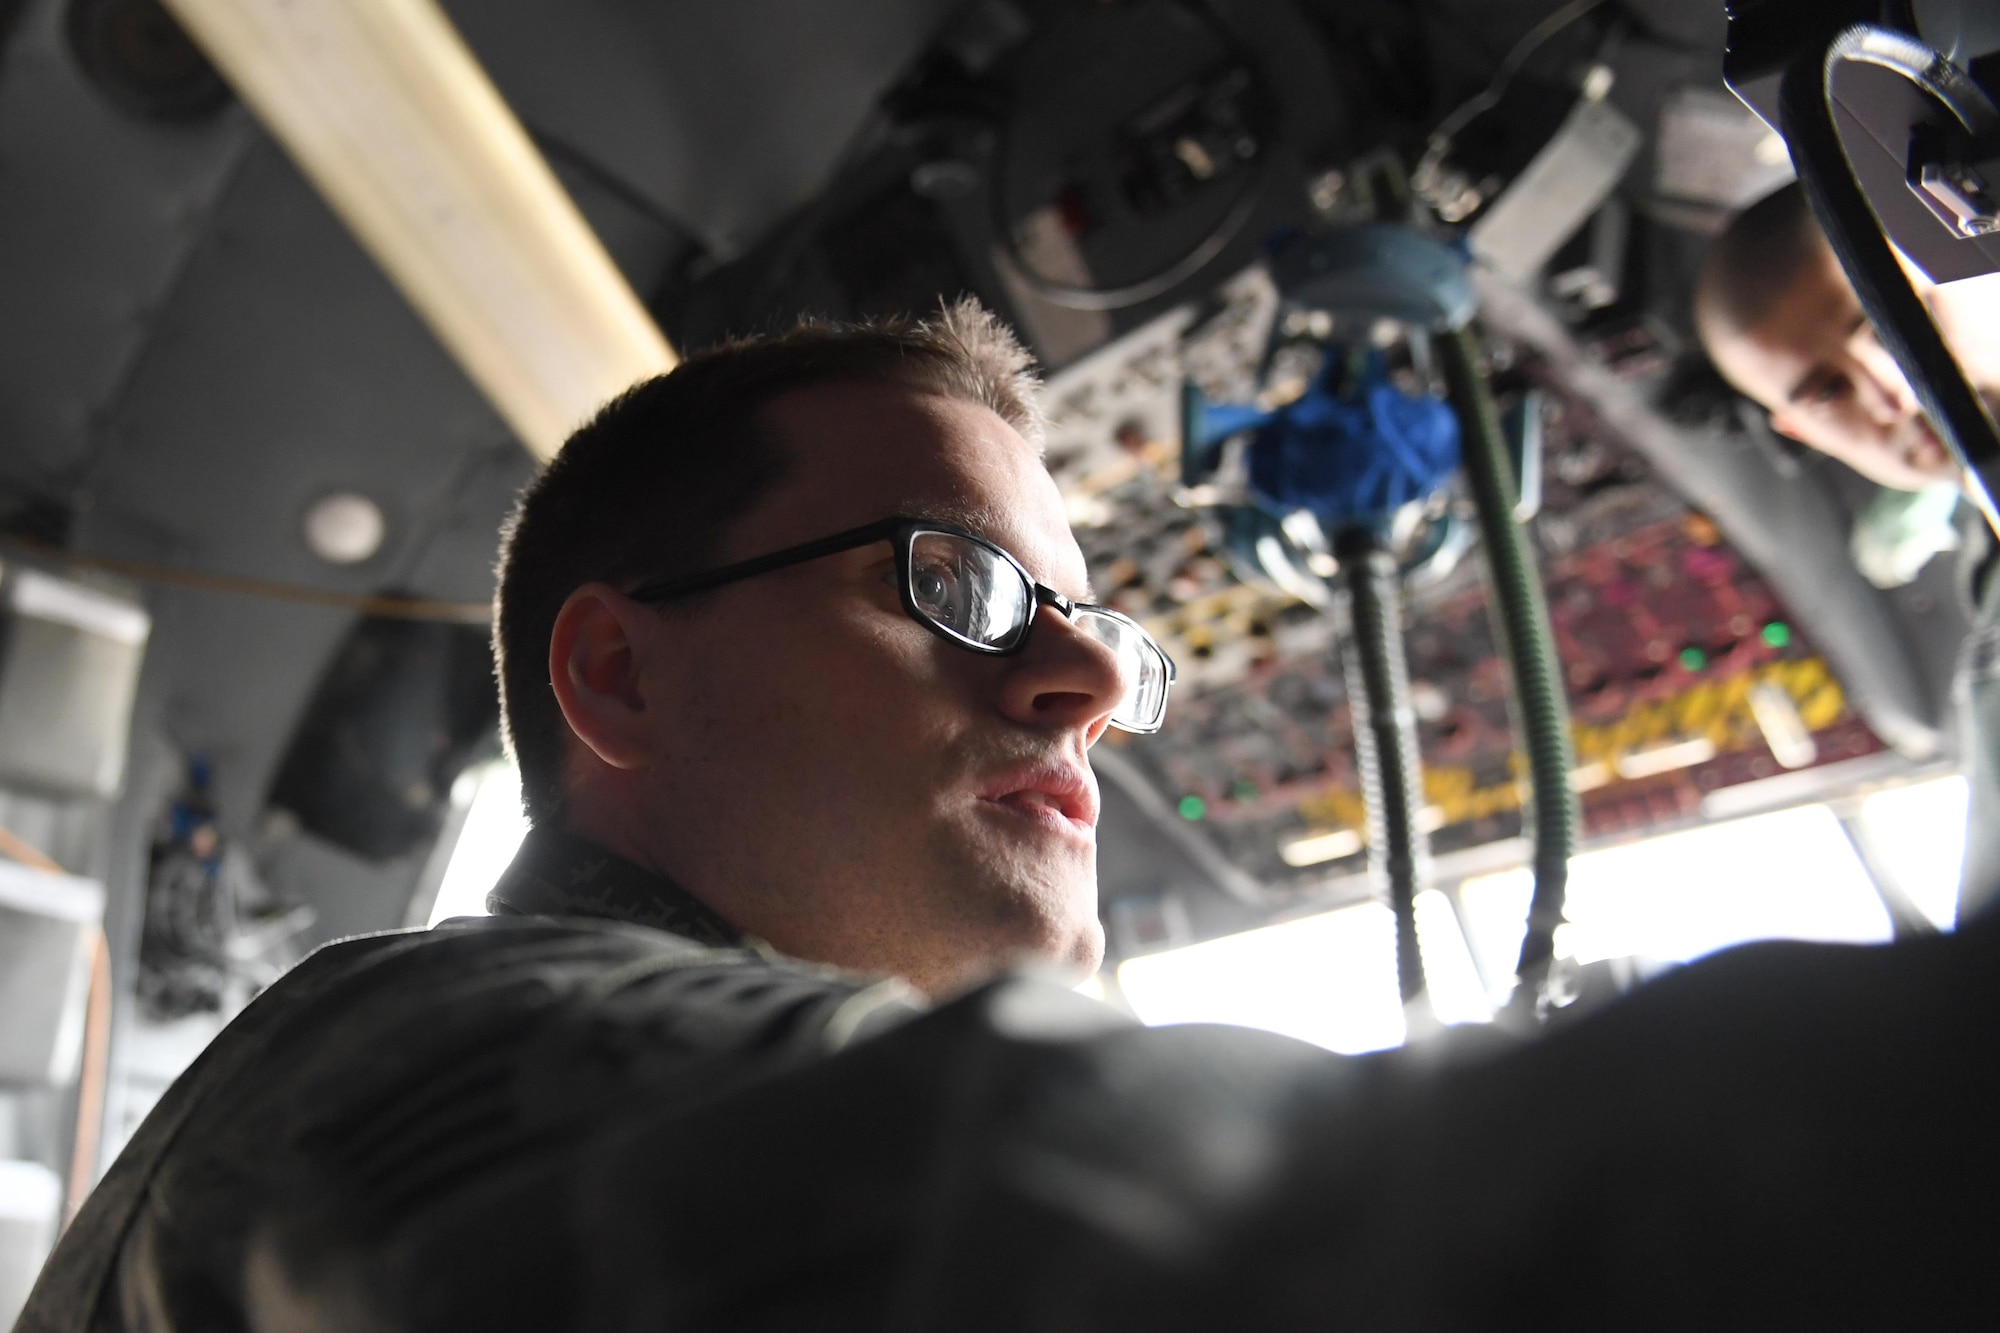 Staff Sgt. Jacob Liebel, communication and navigation systems technician with the 911th Aircraft Maintenance Squadron, performs a functional check on the Real Time In Cockpit system at the Pittsburgh International Airport Air Reserve Station, Feb. 8, 2017. This new system was installed in five of the eight C-130 Hercules aircraft stationed here to improve operational capability of aircrews. (U.S. Air Force photo by Staff Sgt. Marjorie A. Bowlden)